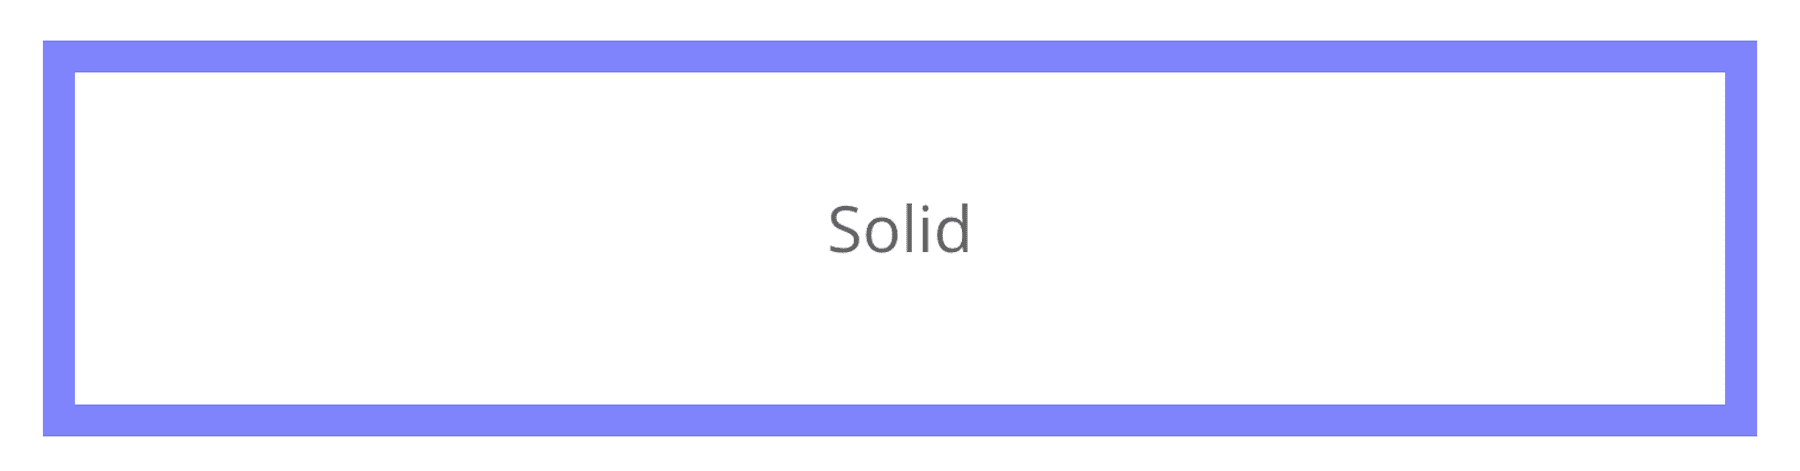 Solid border style in Divi Border Options